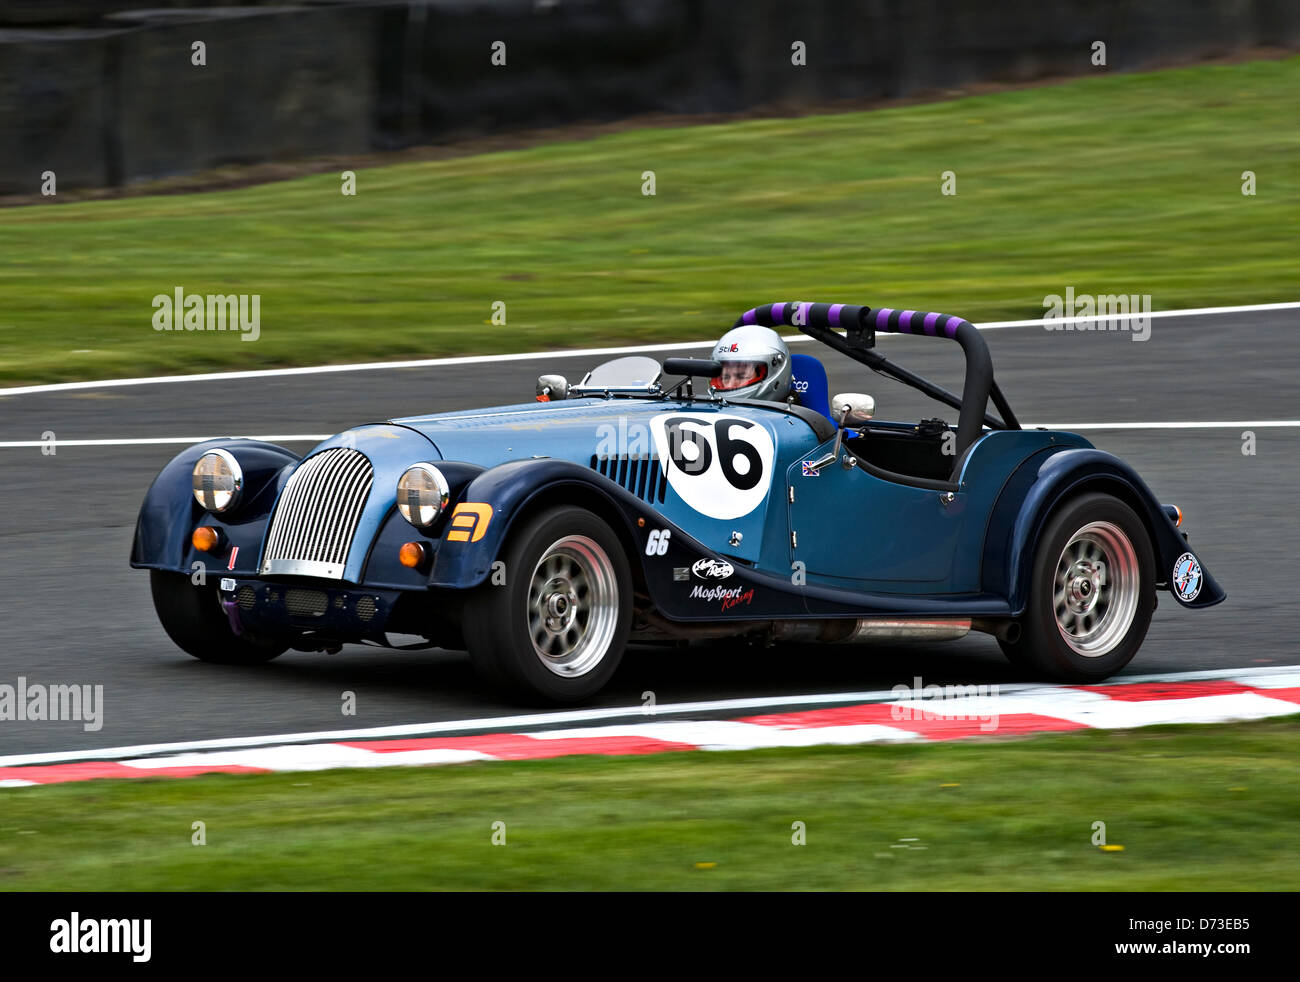 Morgan Sports Car Competing at Oulton Park Motor Racing Circuit in Motorsport Race Event Cheshire England United Kingdom UK Stock Photo